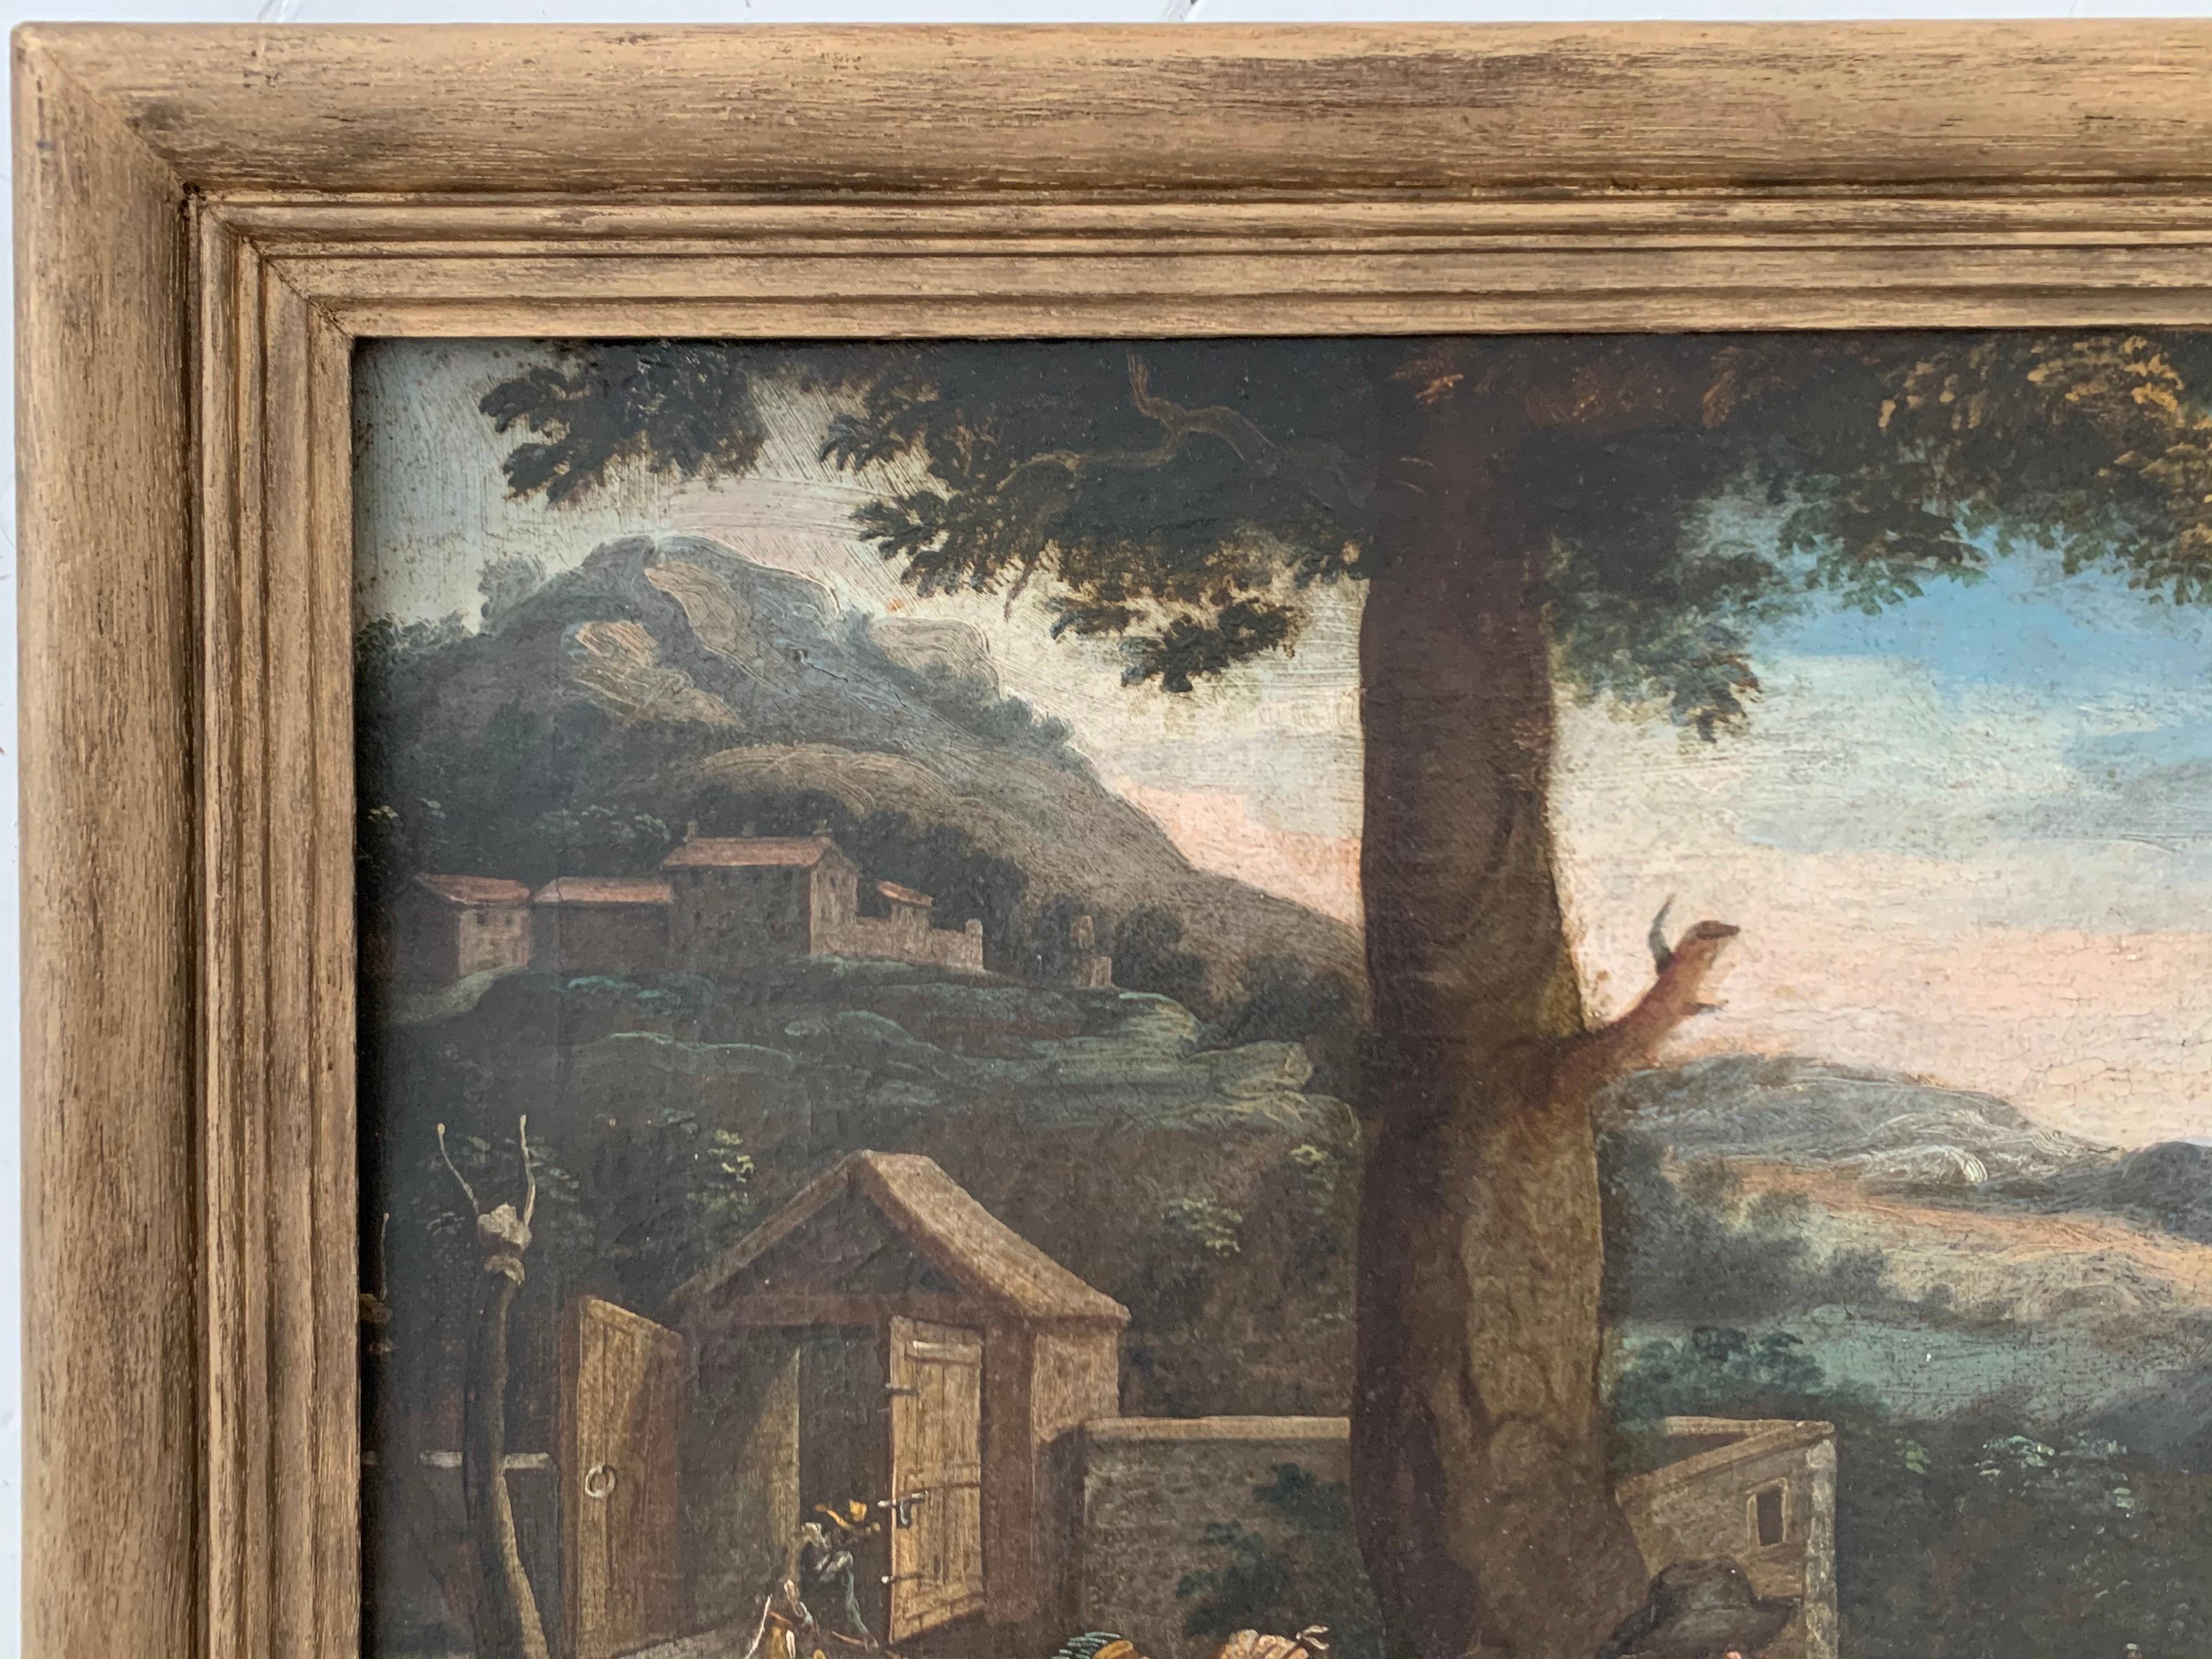 FINE 17th CENTURY ITALIAN OLD MASTER OIL PAINTING - FIGURES GARDENING LANDSCAPE - Old Masters Painting by Unknown